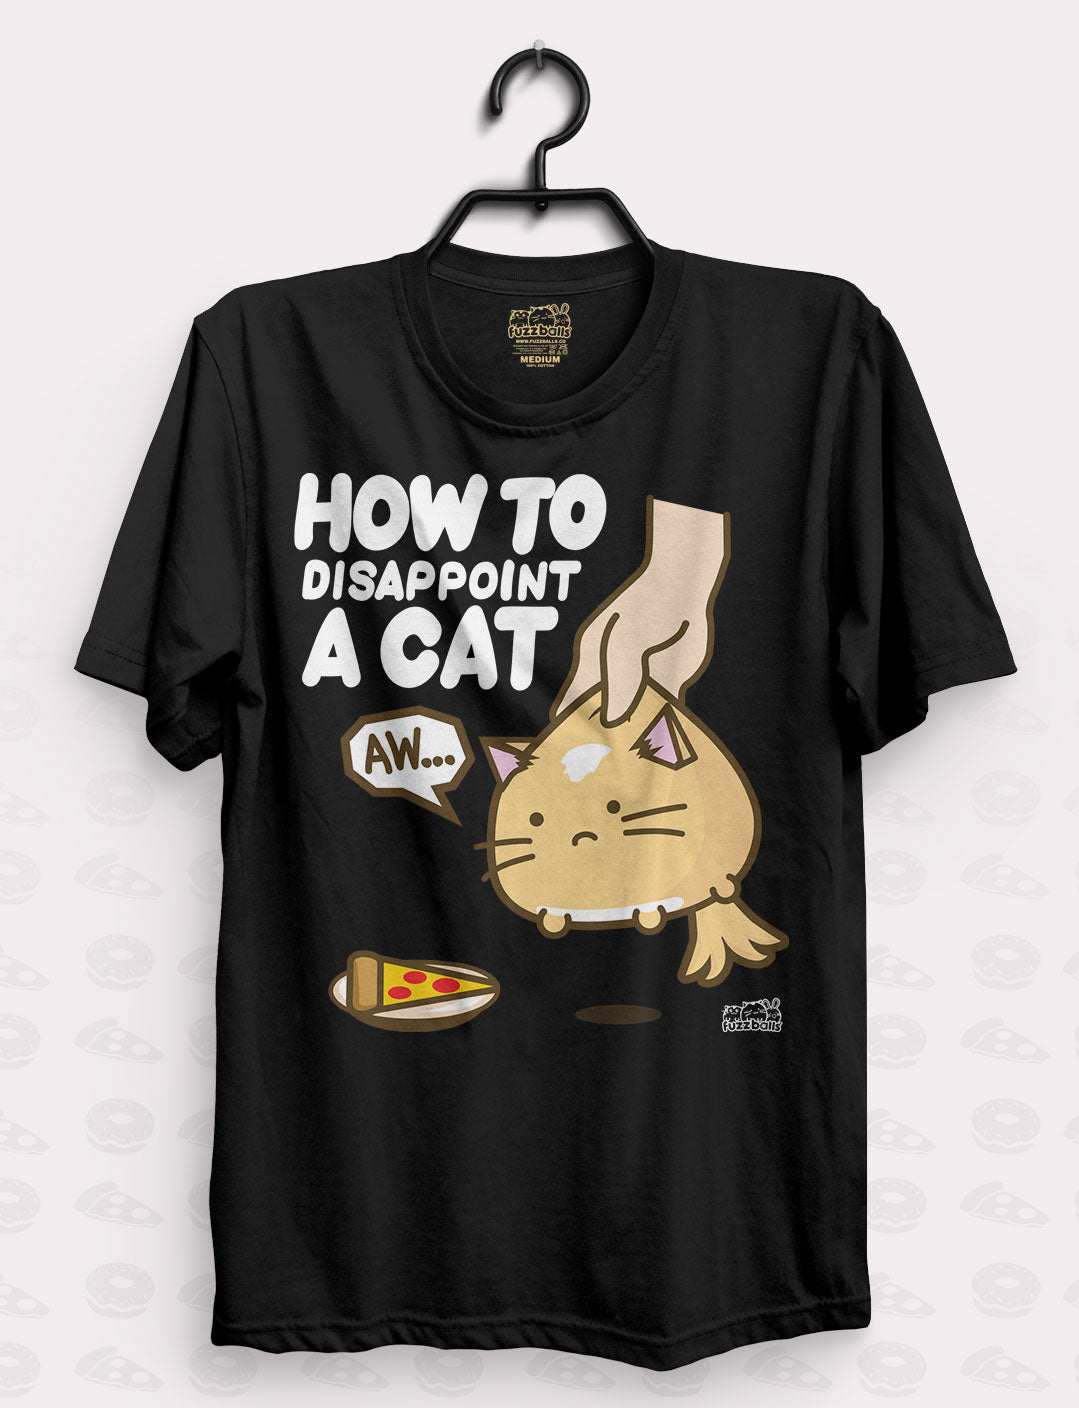 How to disappoint a cat shirt